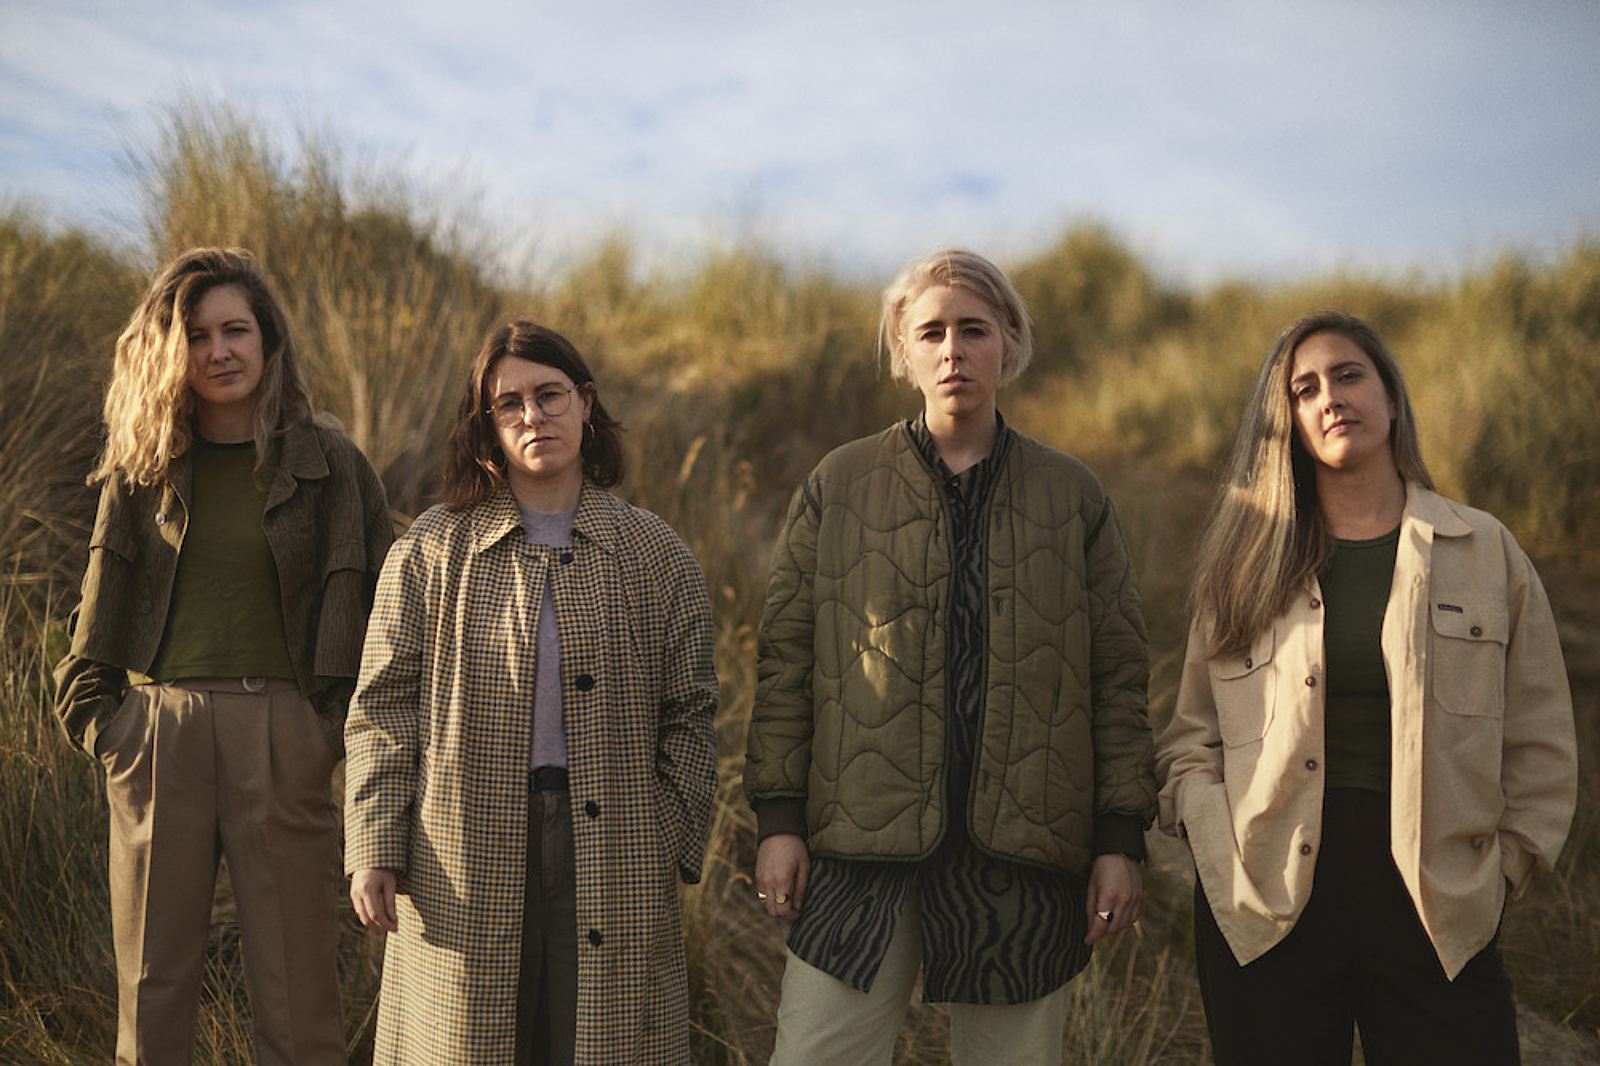 Pillow Queens announce new album 'Leave The Light On'